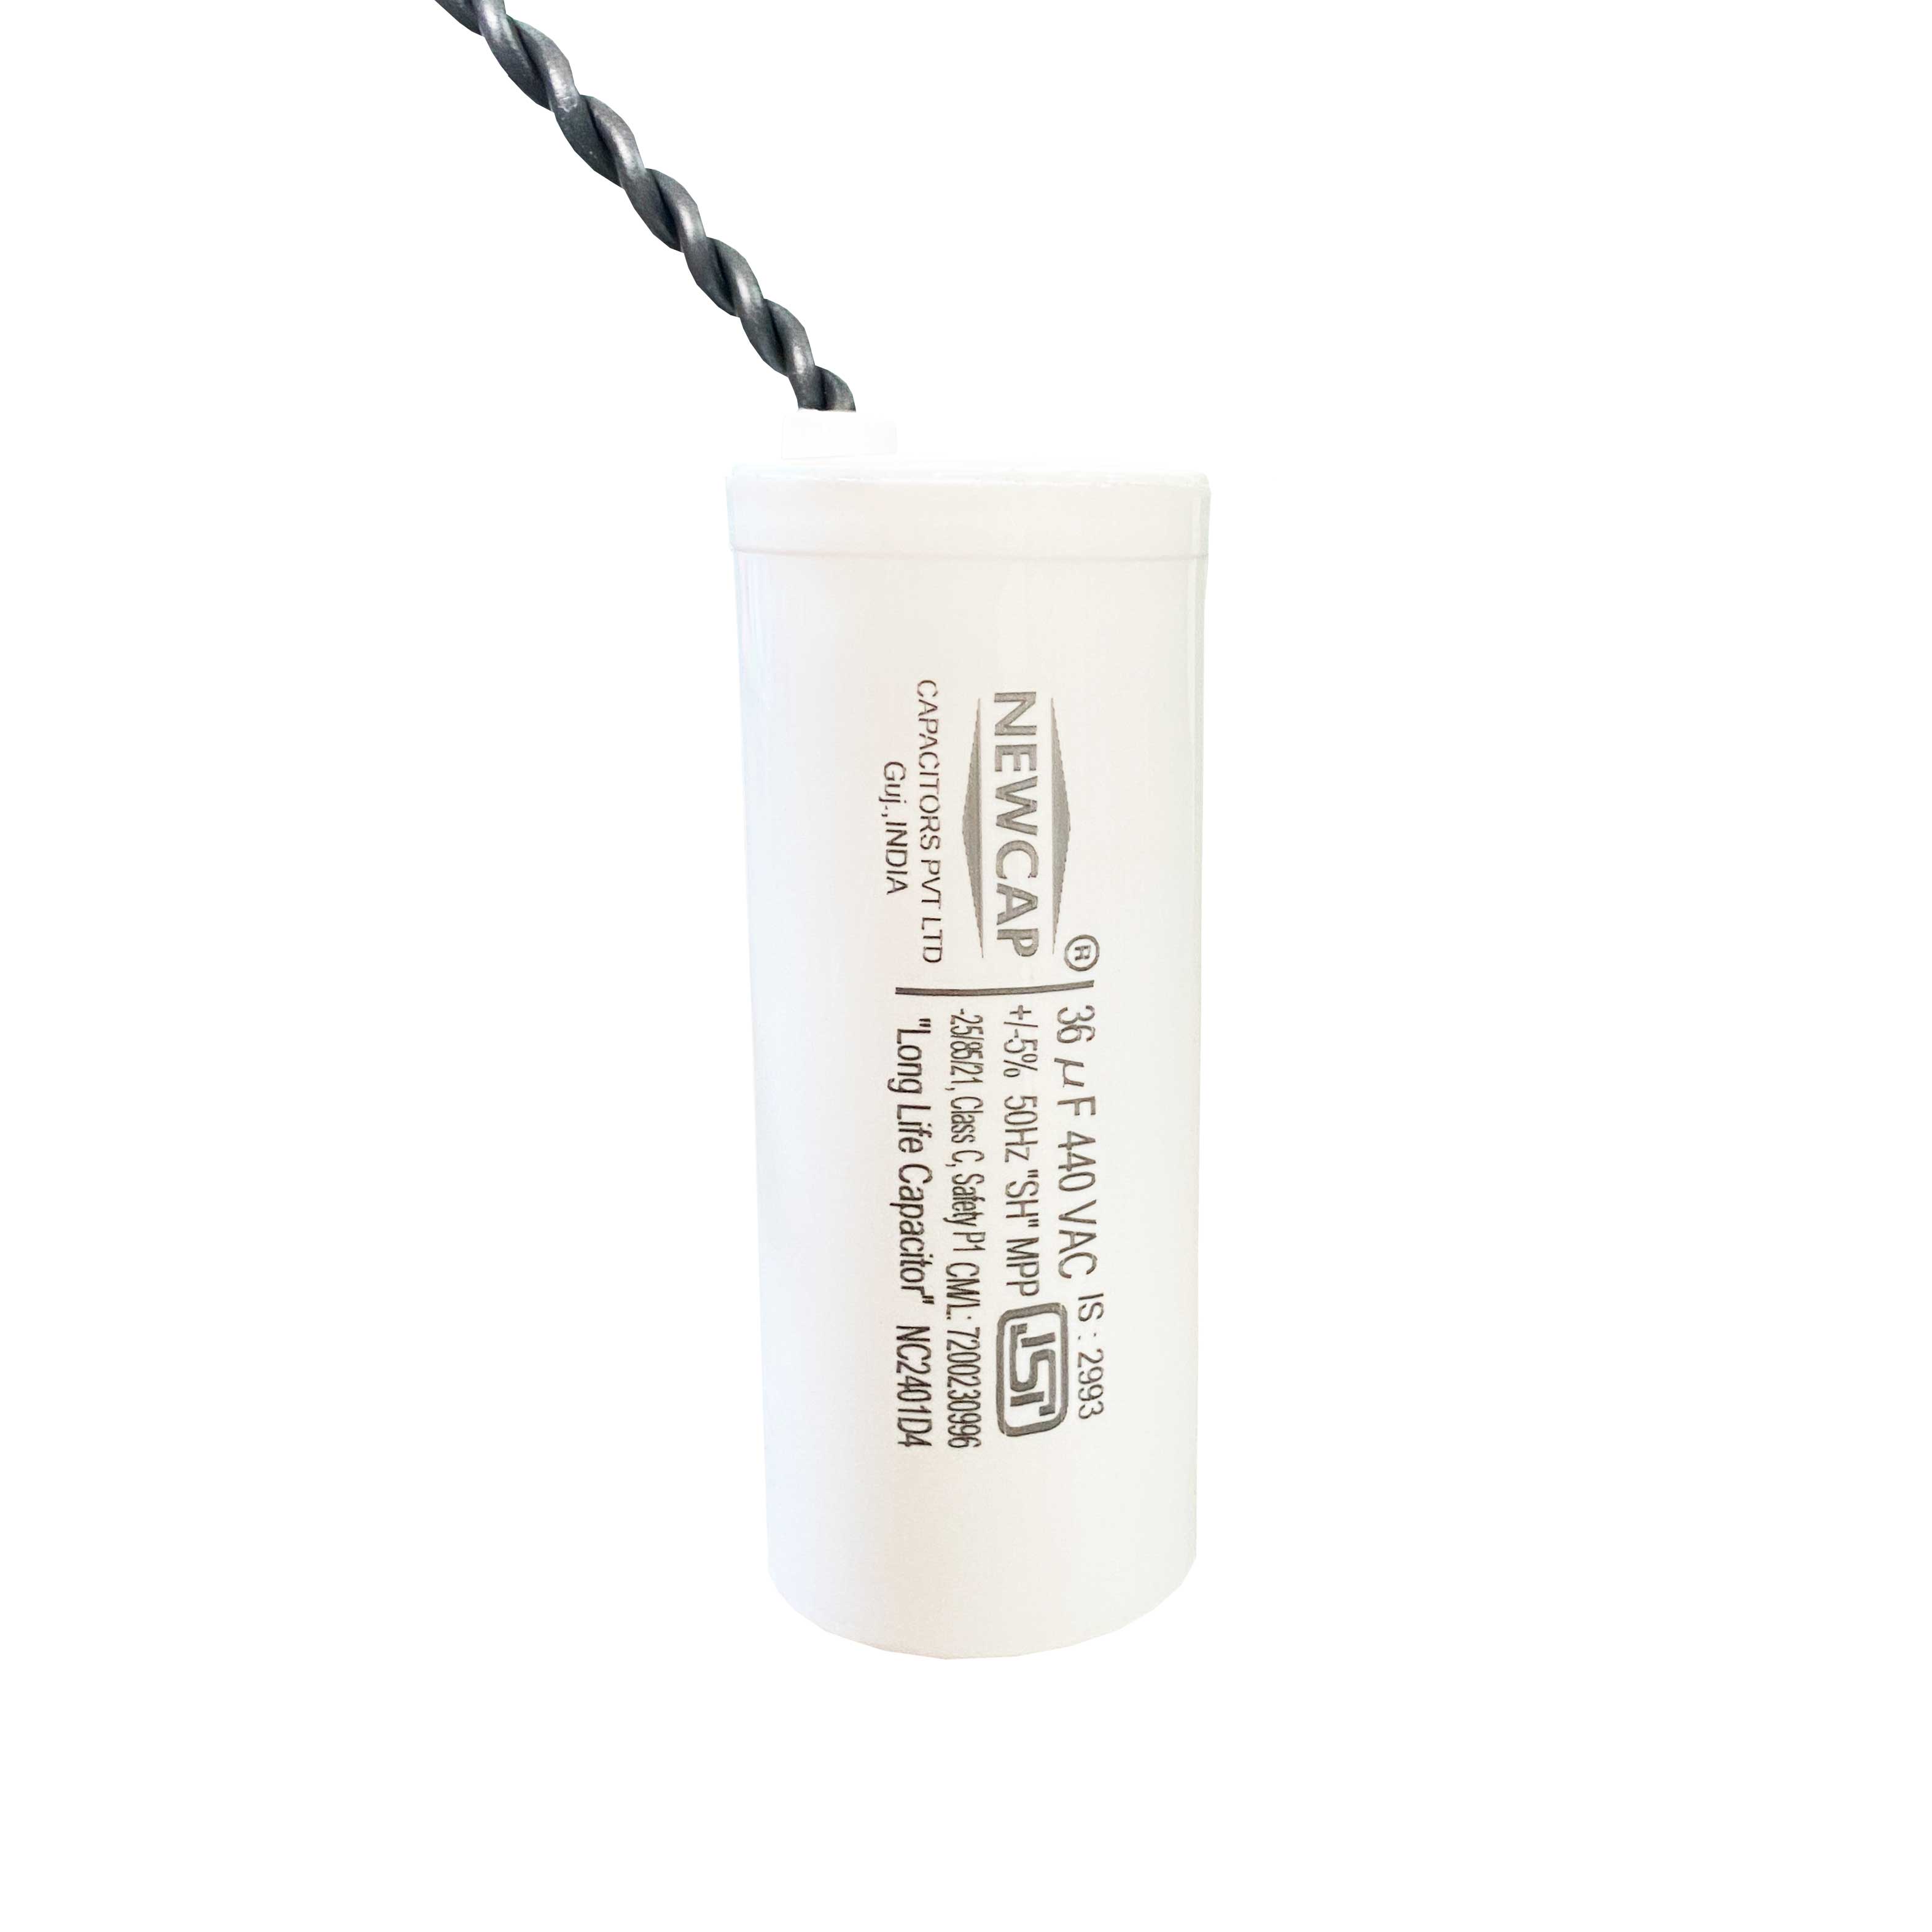 36 MFD Run Capacitor suitable for any motor 230 VAC